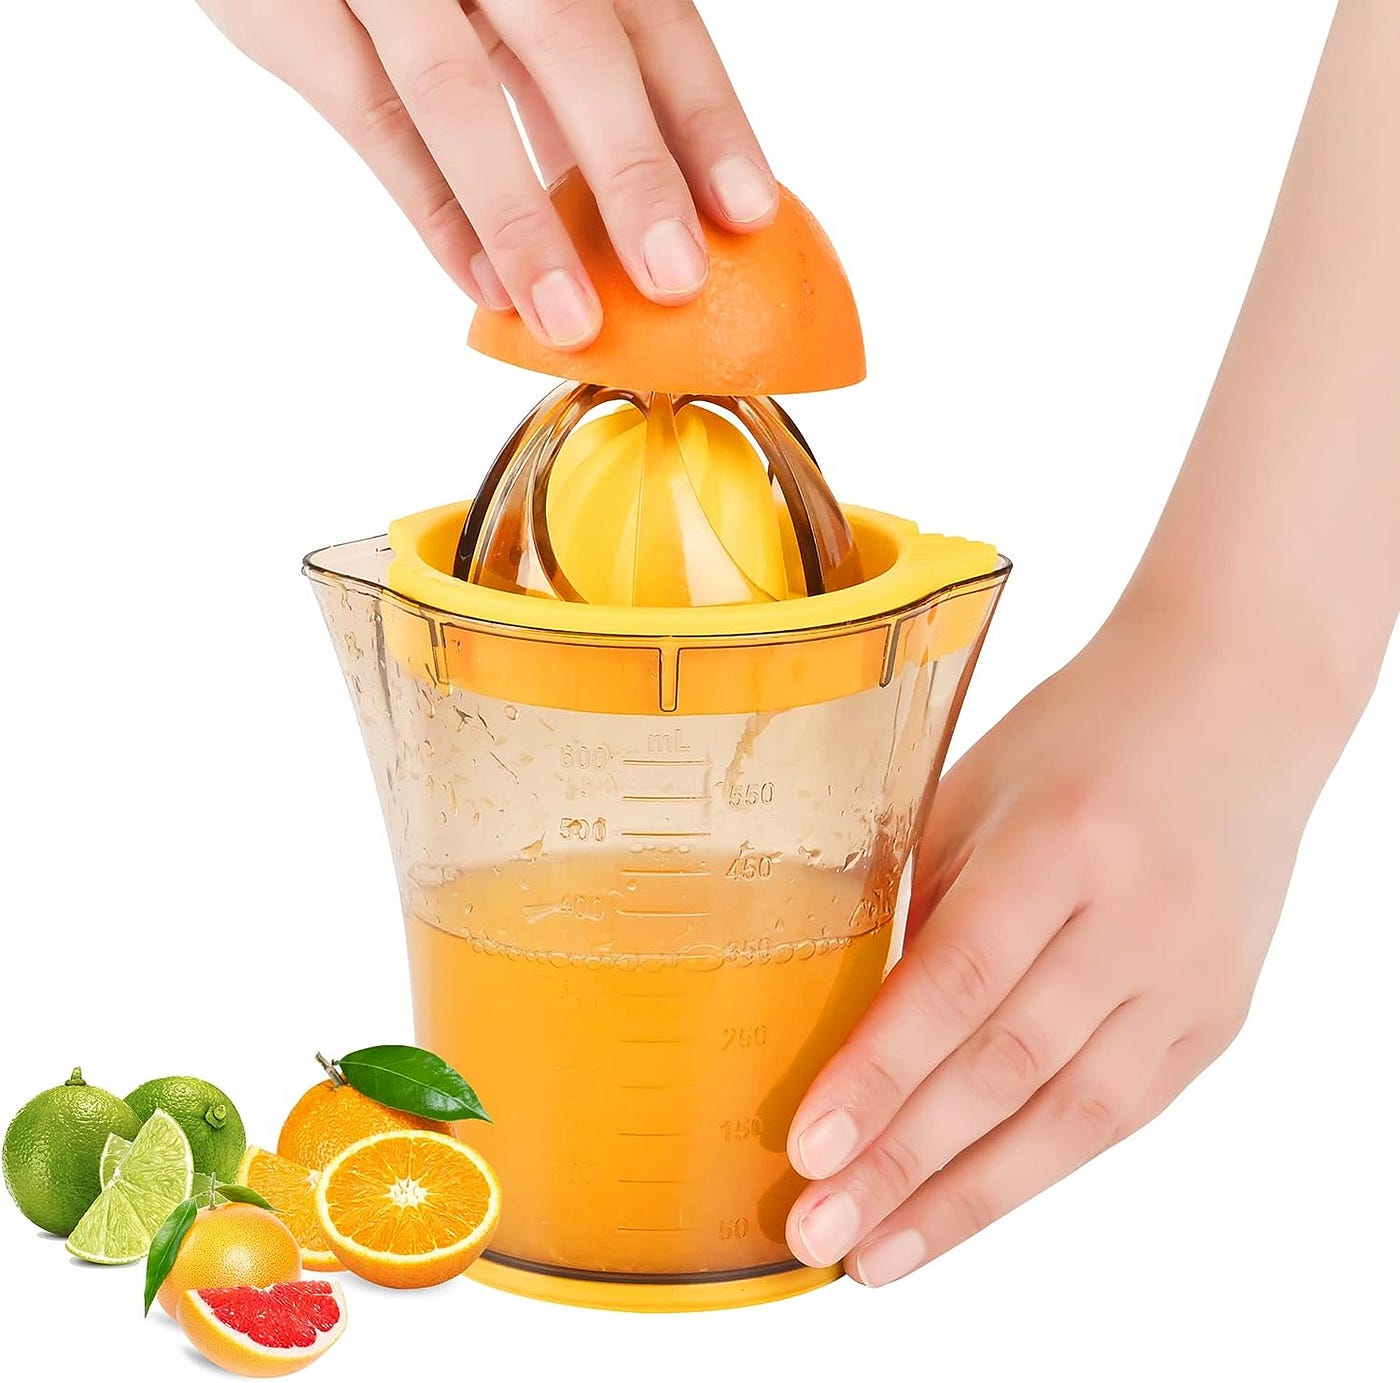 Healthy habits start here The 4-in-1 juicer extracts fresh juice